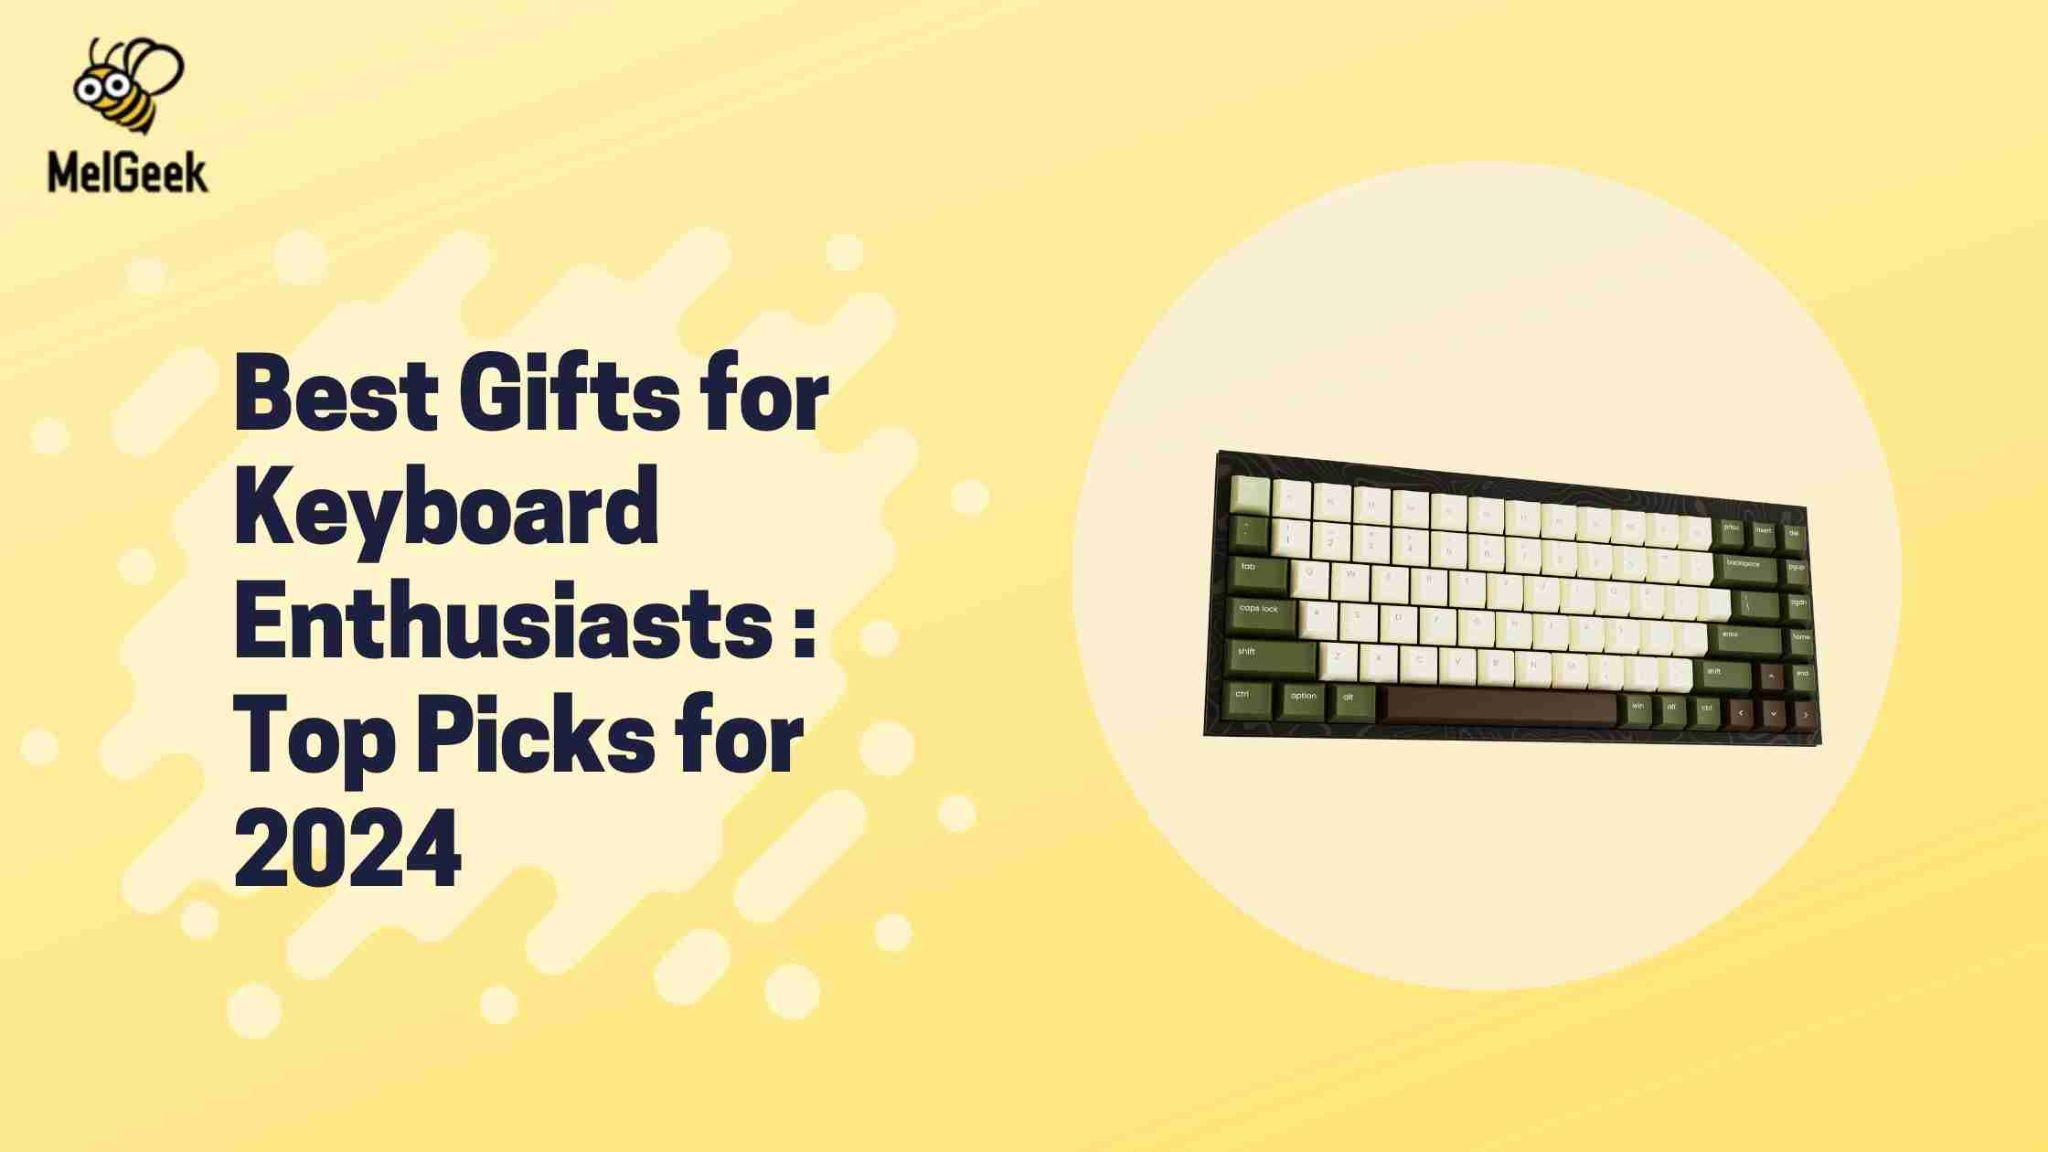 Best Gifts for Keyboard Enthusiasts : Top Picks for 2024